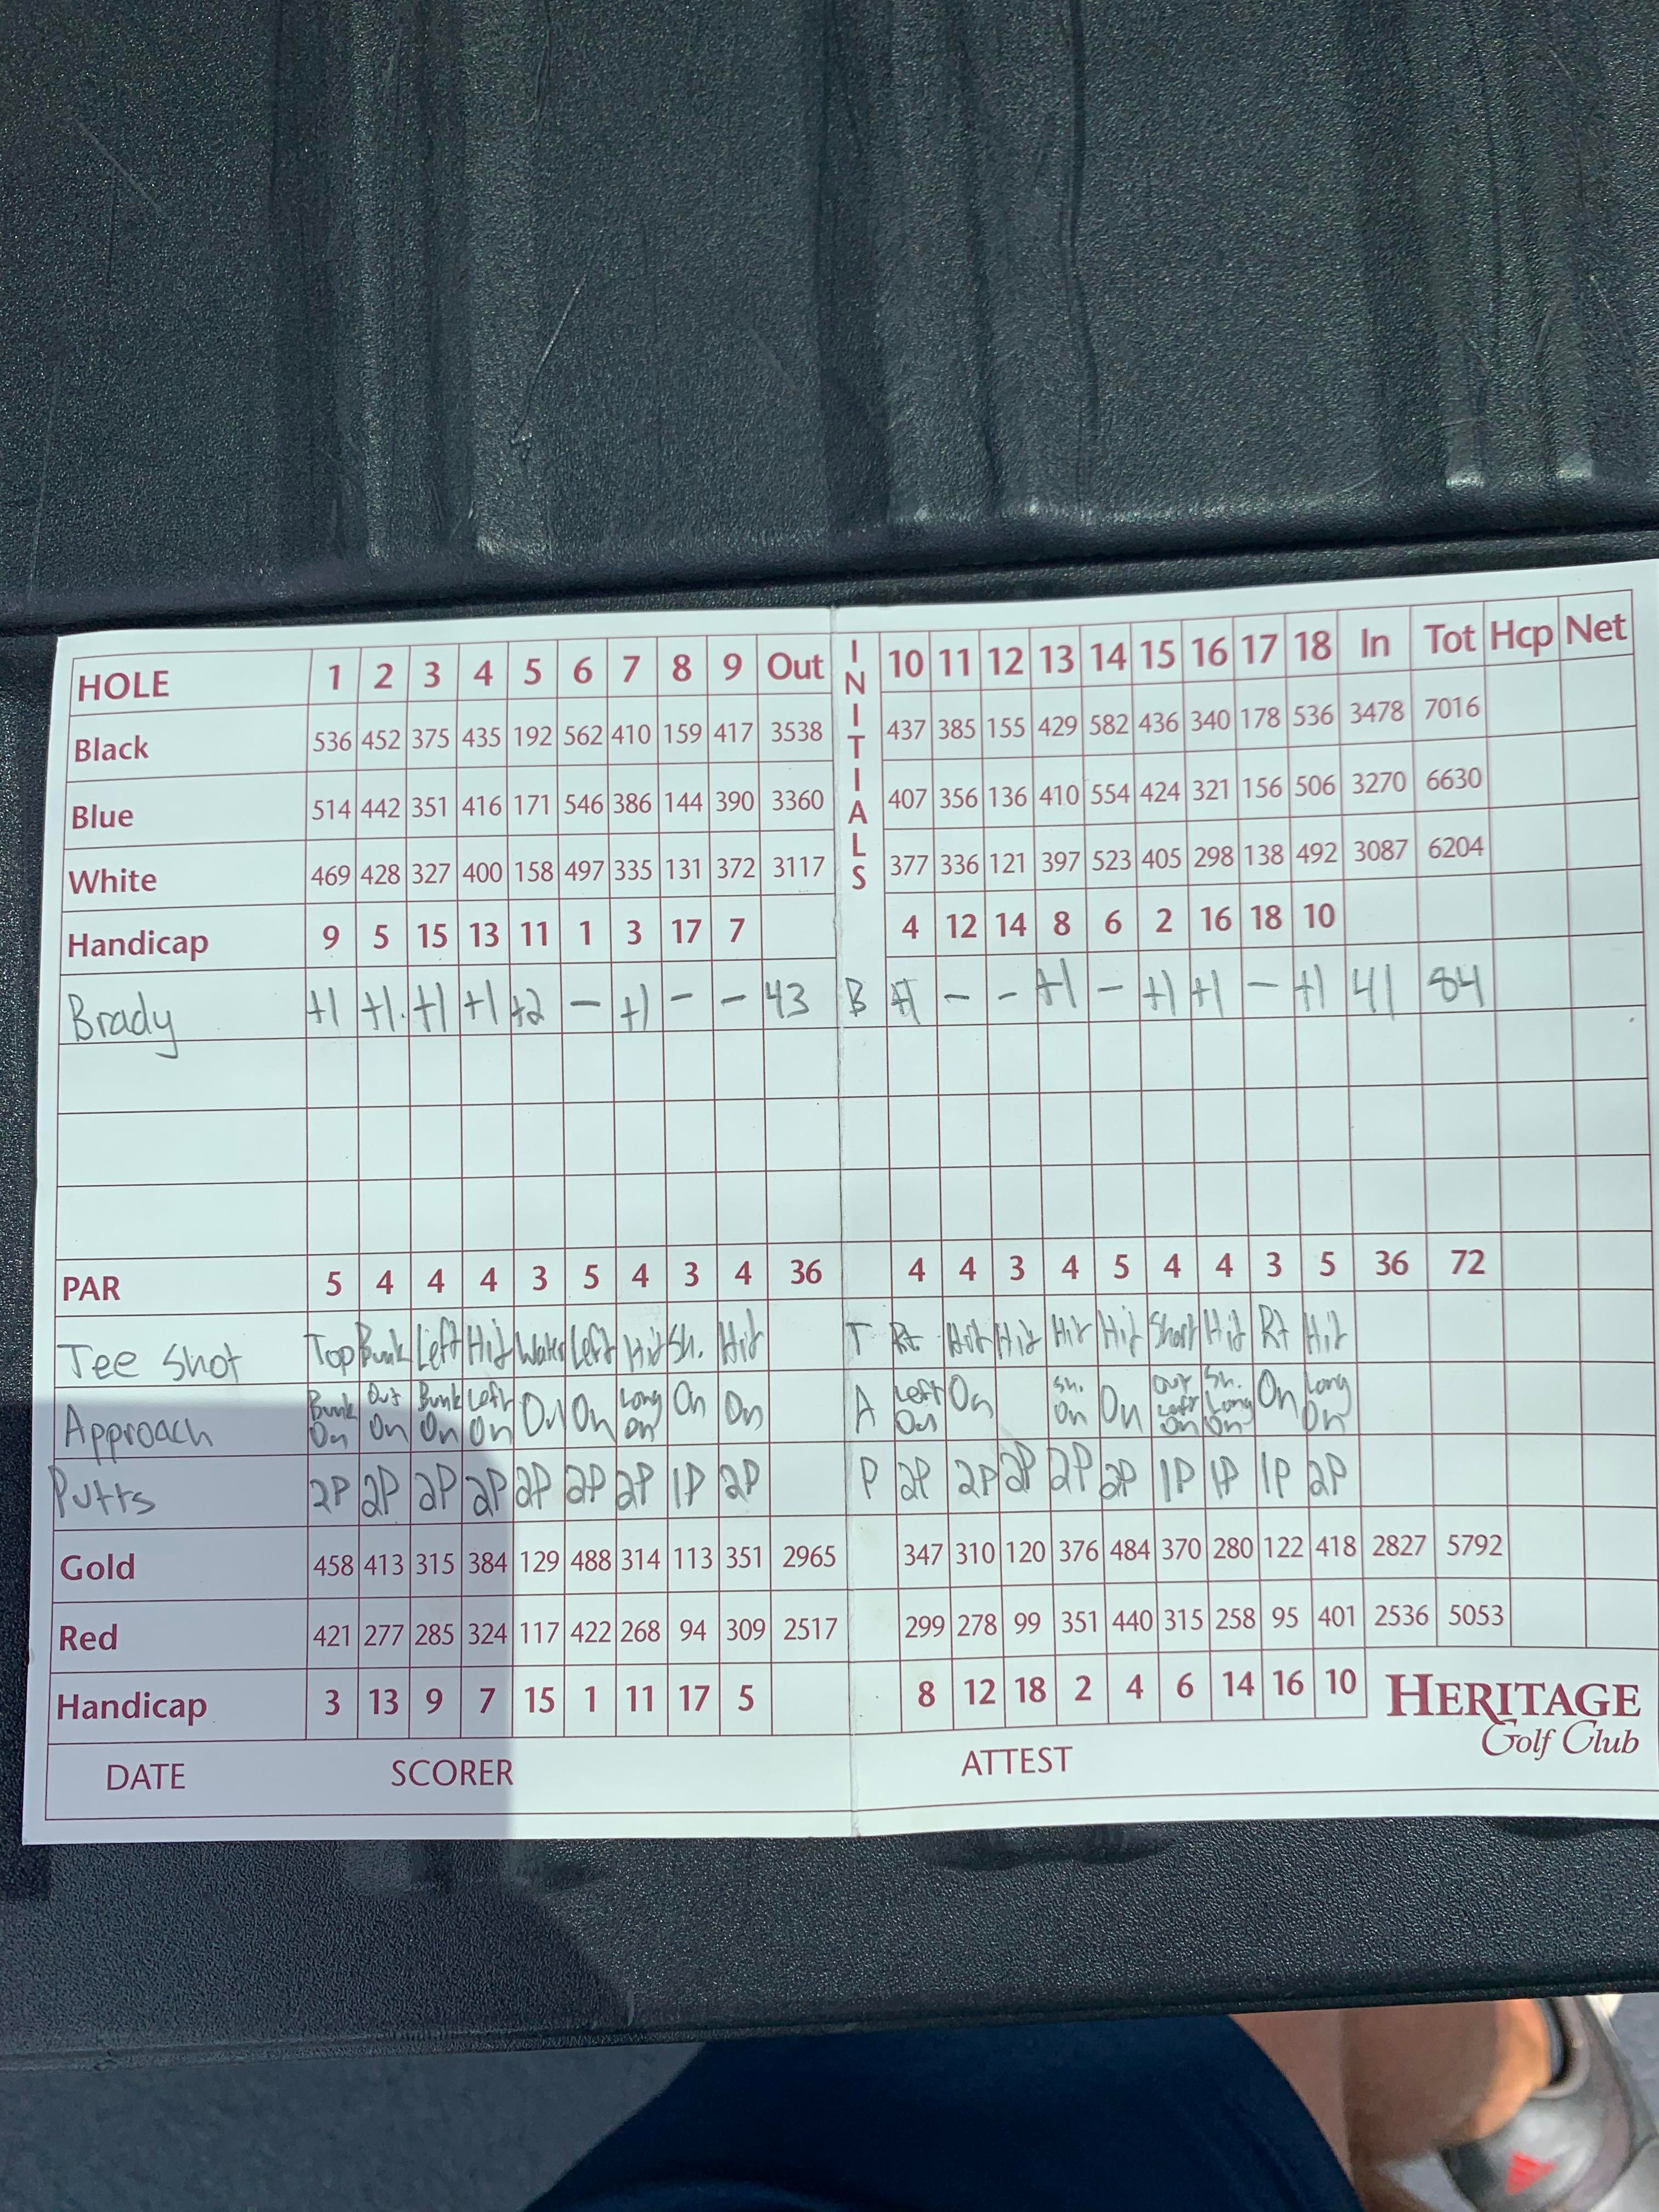 Shot my new personal best today! Pumped about it!!